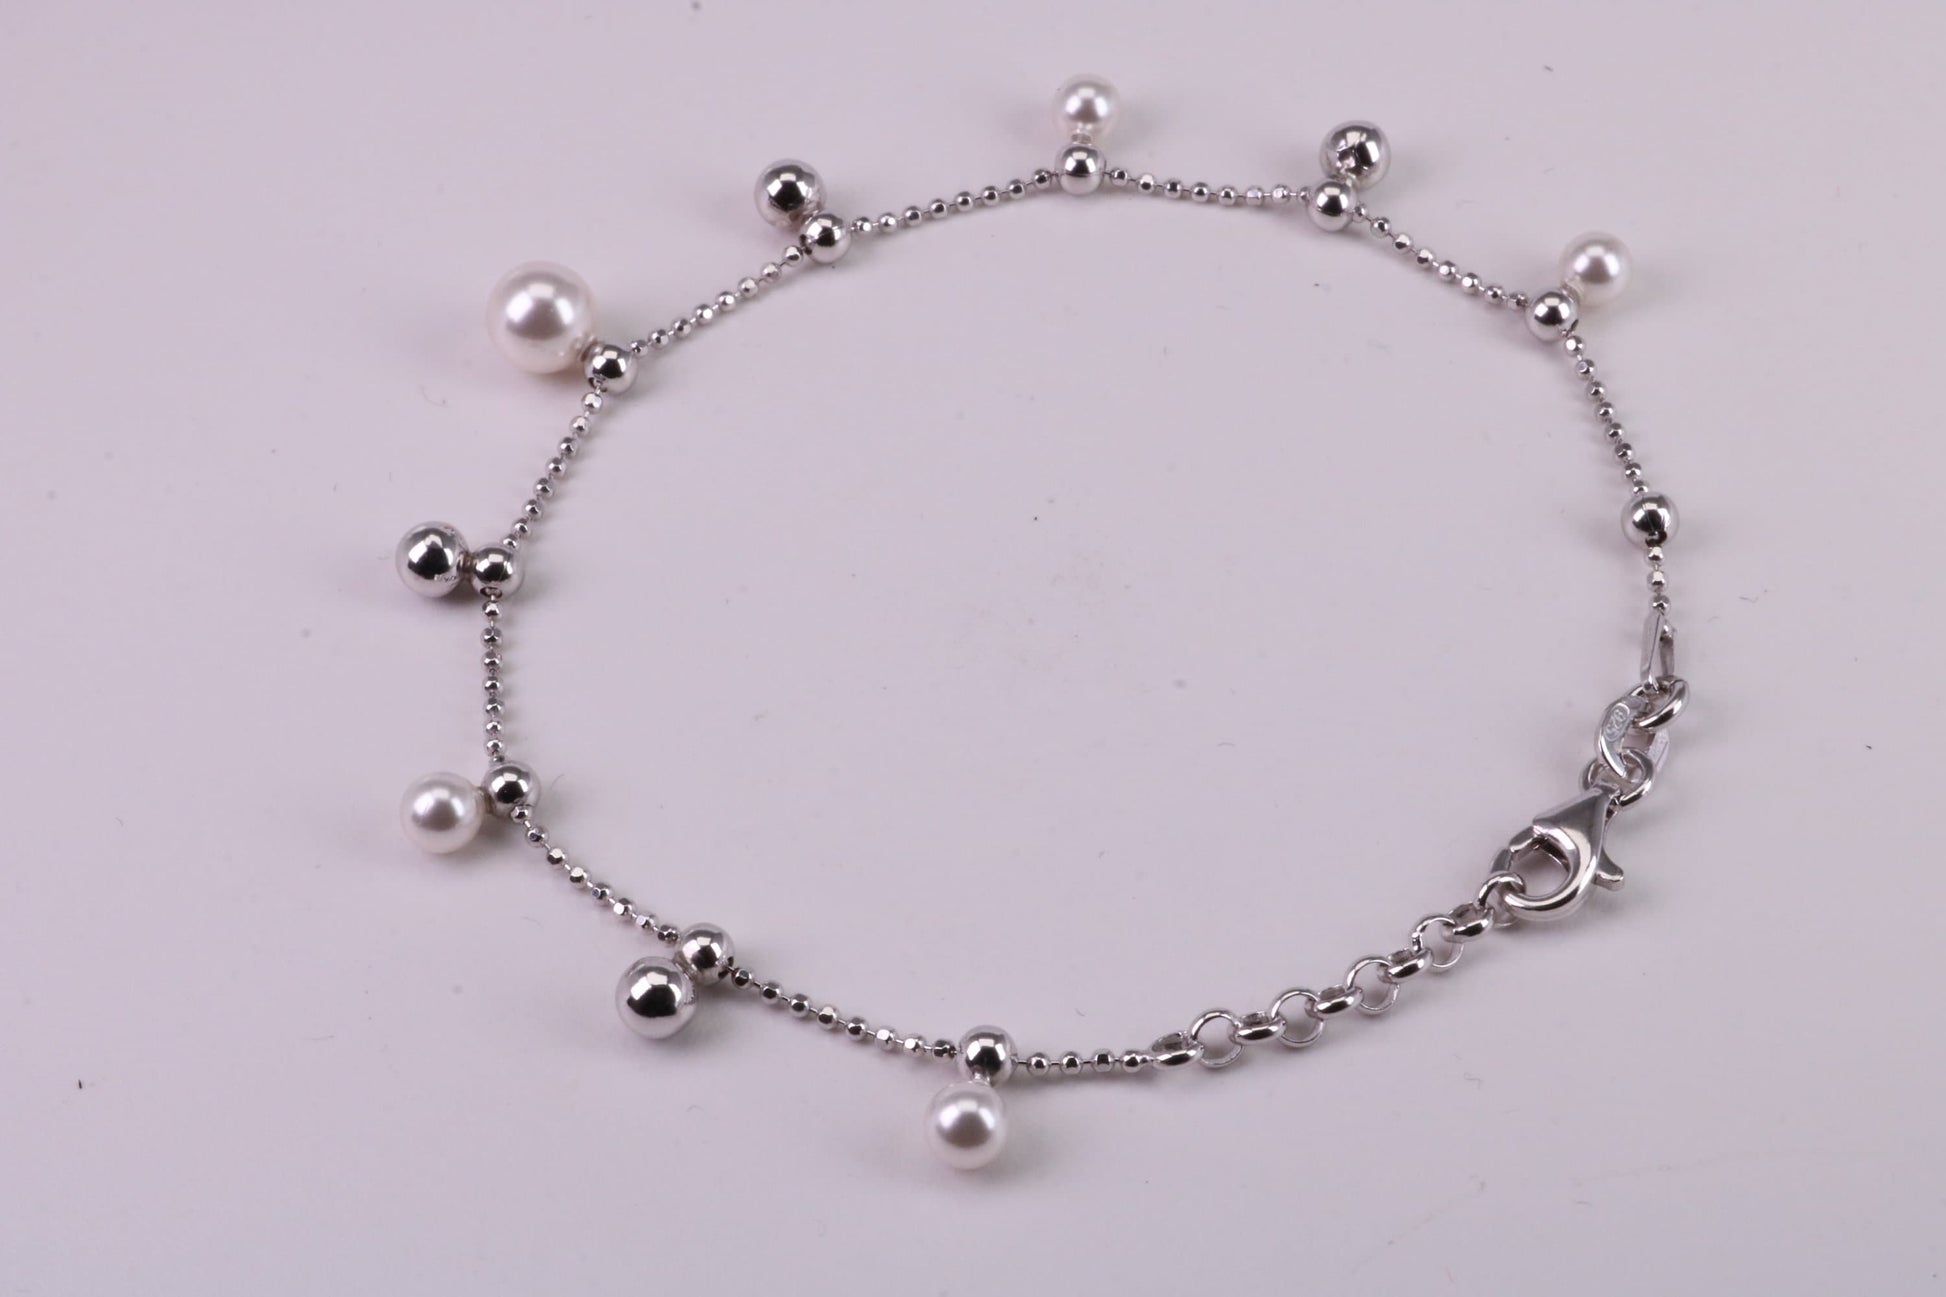 Pearl and Plain Bead Bracelet, With Length Adjustable Chain, Made from solid Sterling Silver